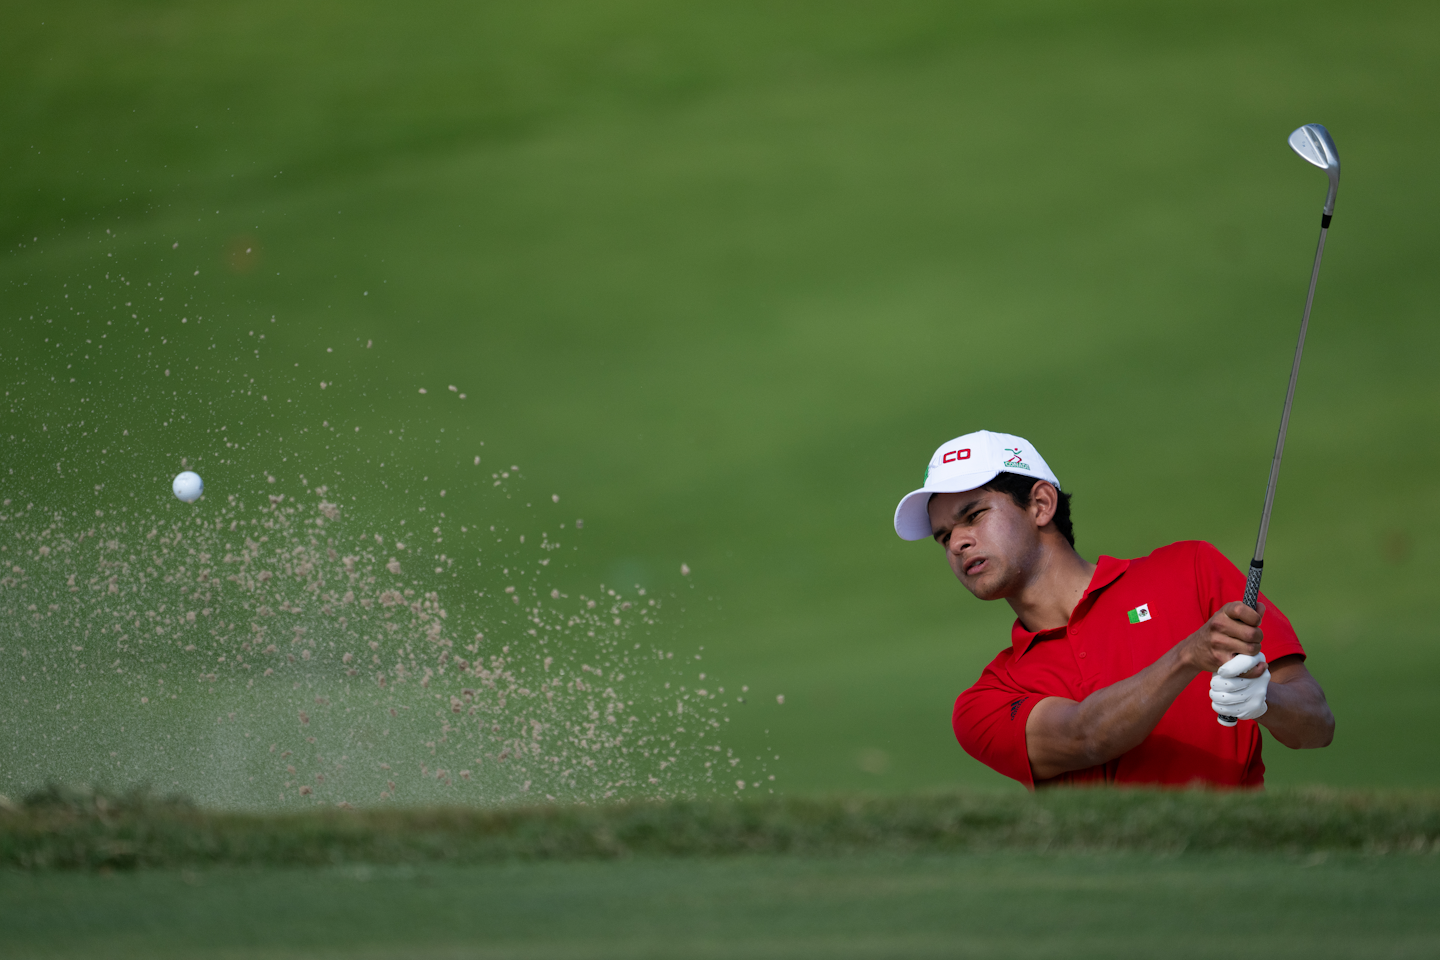 Omar Morales of Mexico plays a stroke from a bunker on the No. 6 hole.